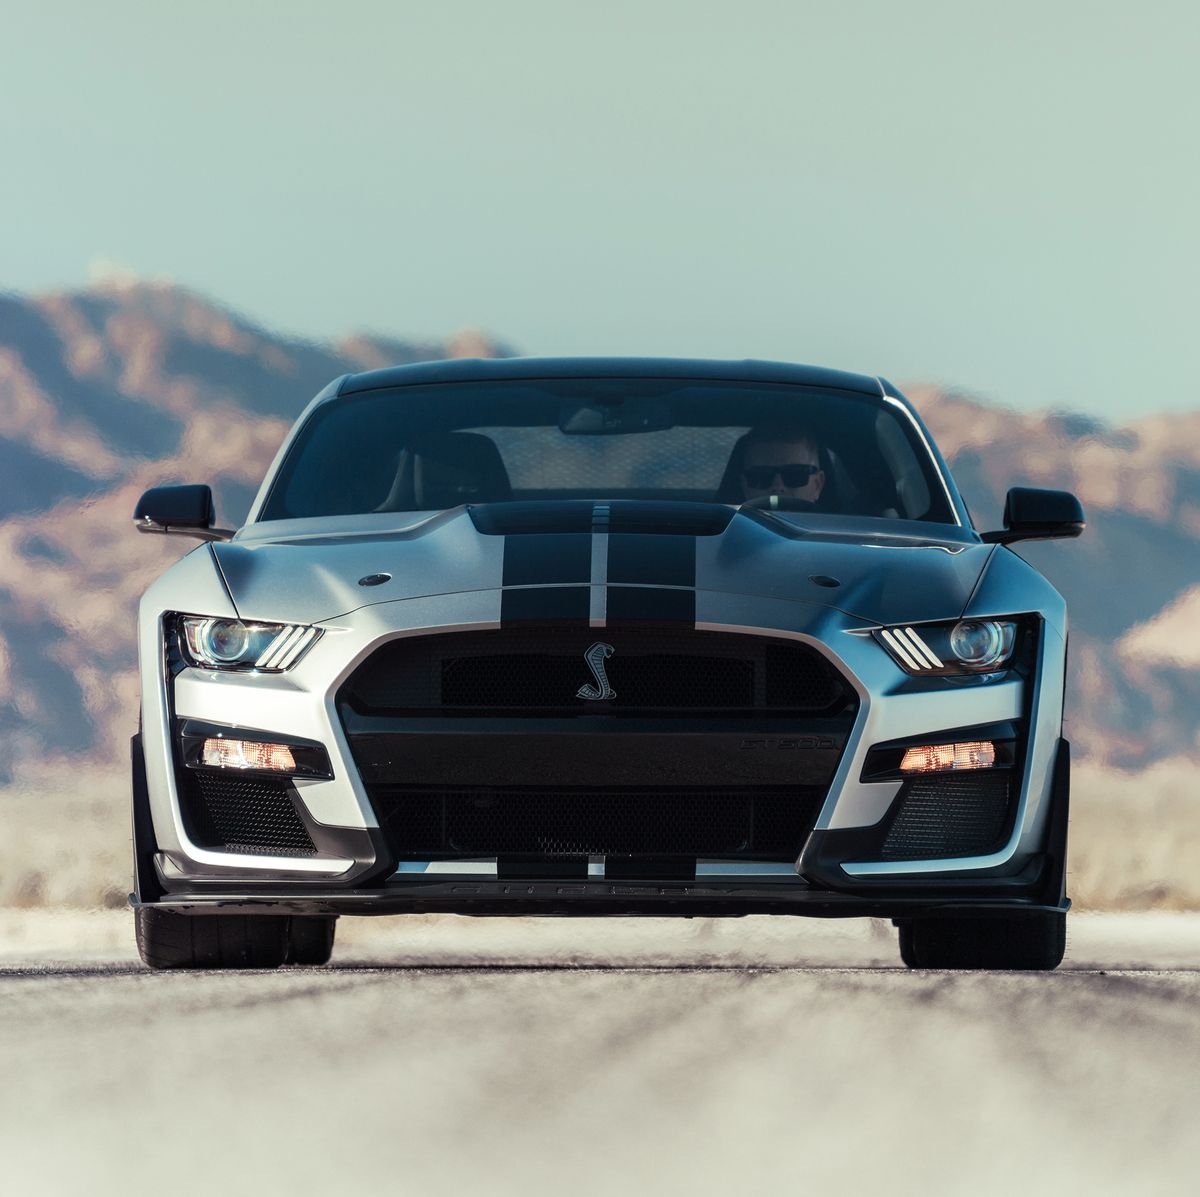 The 2020 Ford Mustang Shelby GT500 Has a Top Speed Limited to 180 MPH